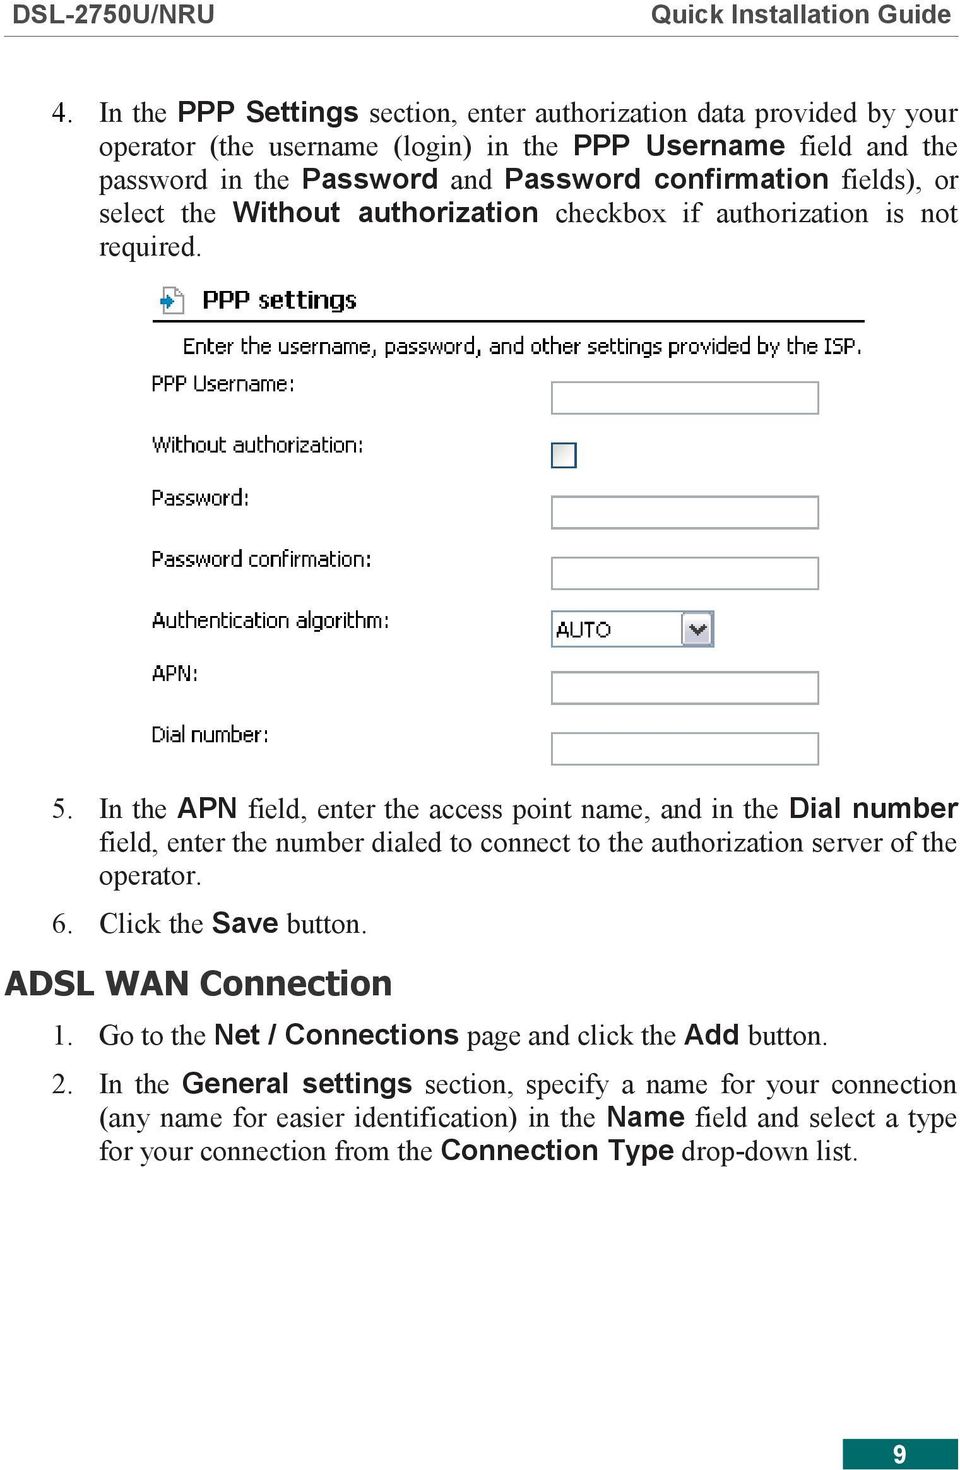 In the APN field, enter the access point name, and in the Dial number field, enter the number dialed to connect to the authorization server of the operator. 6. Click the Save button.